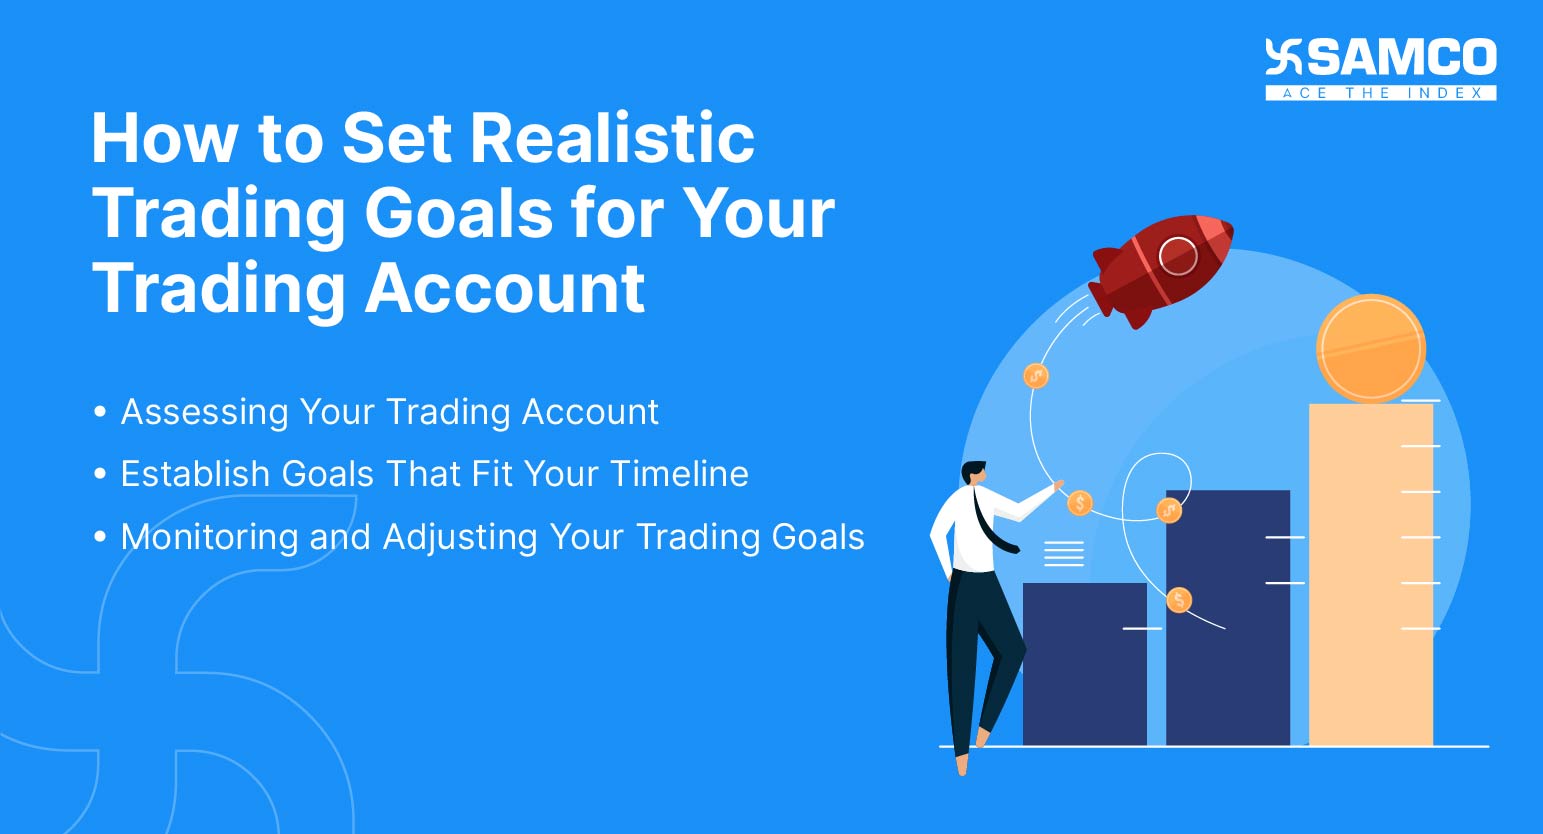 How to Set Realistic Trading Goals for Your Trading Account